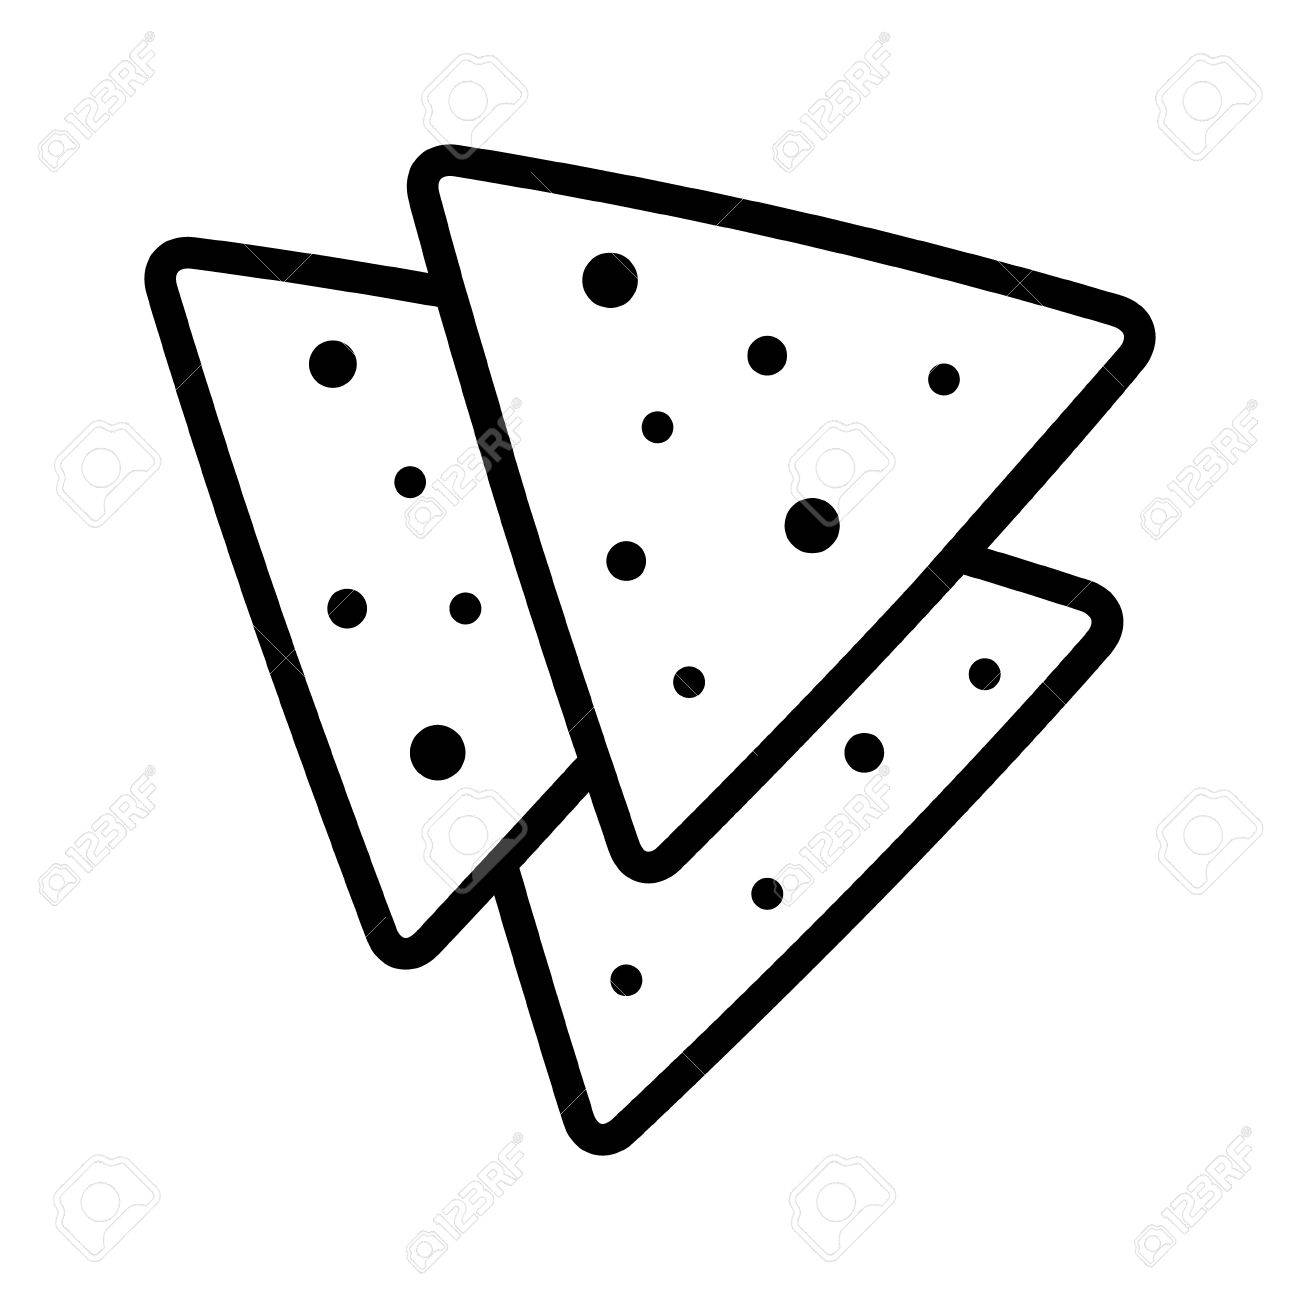 Tortilla chips or nachos tortillas line art icon for apps and...